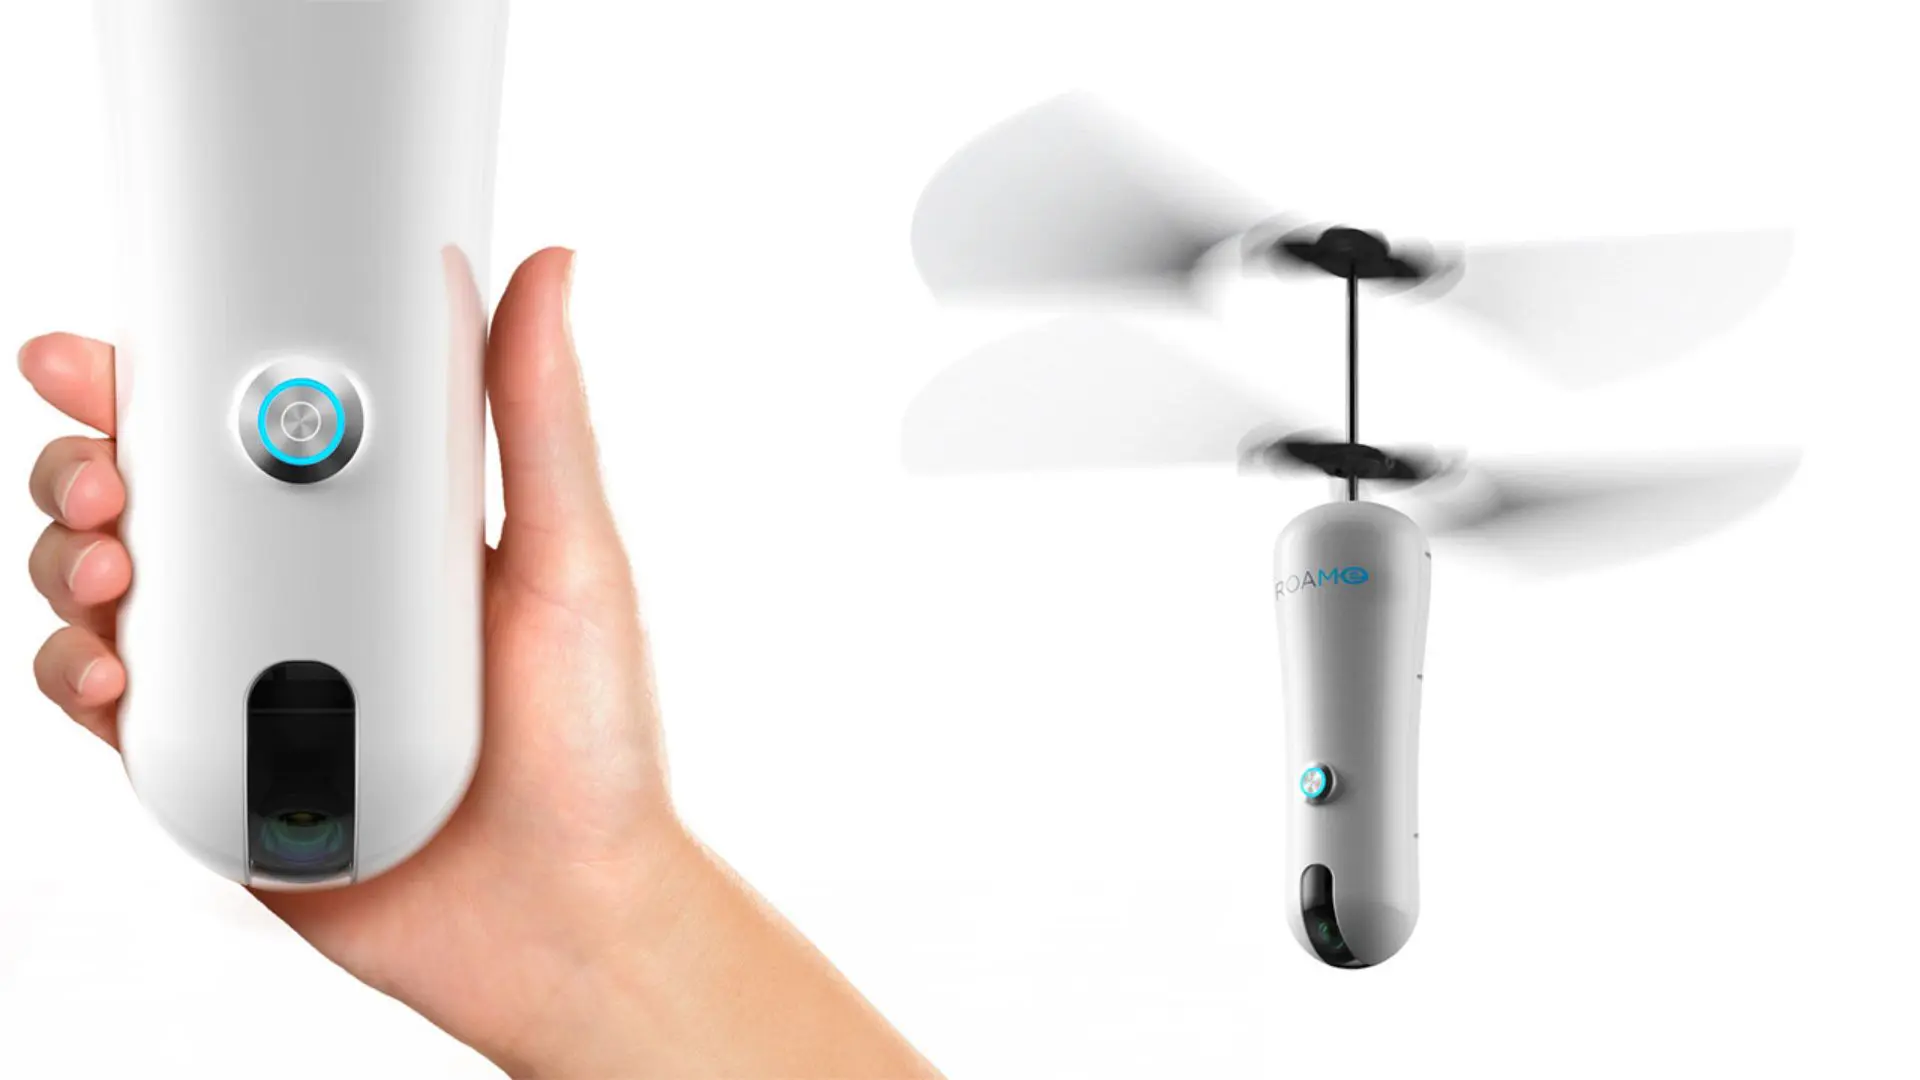 Roam-e drone by IoT Group technology